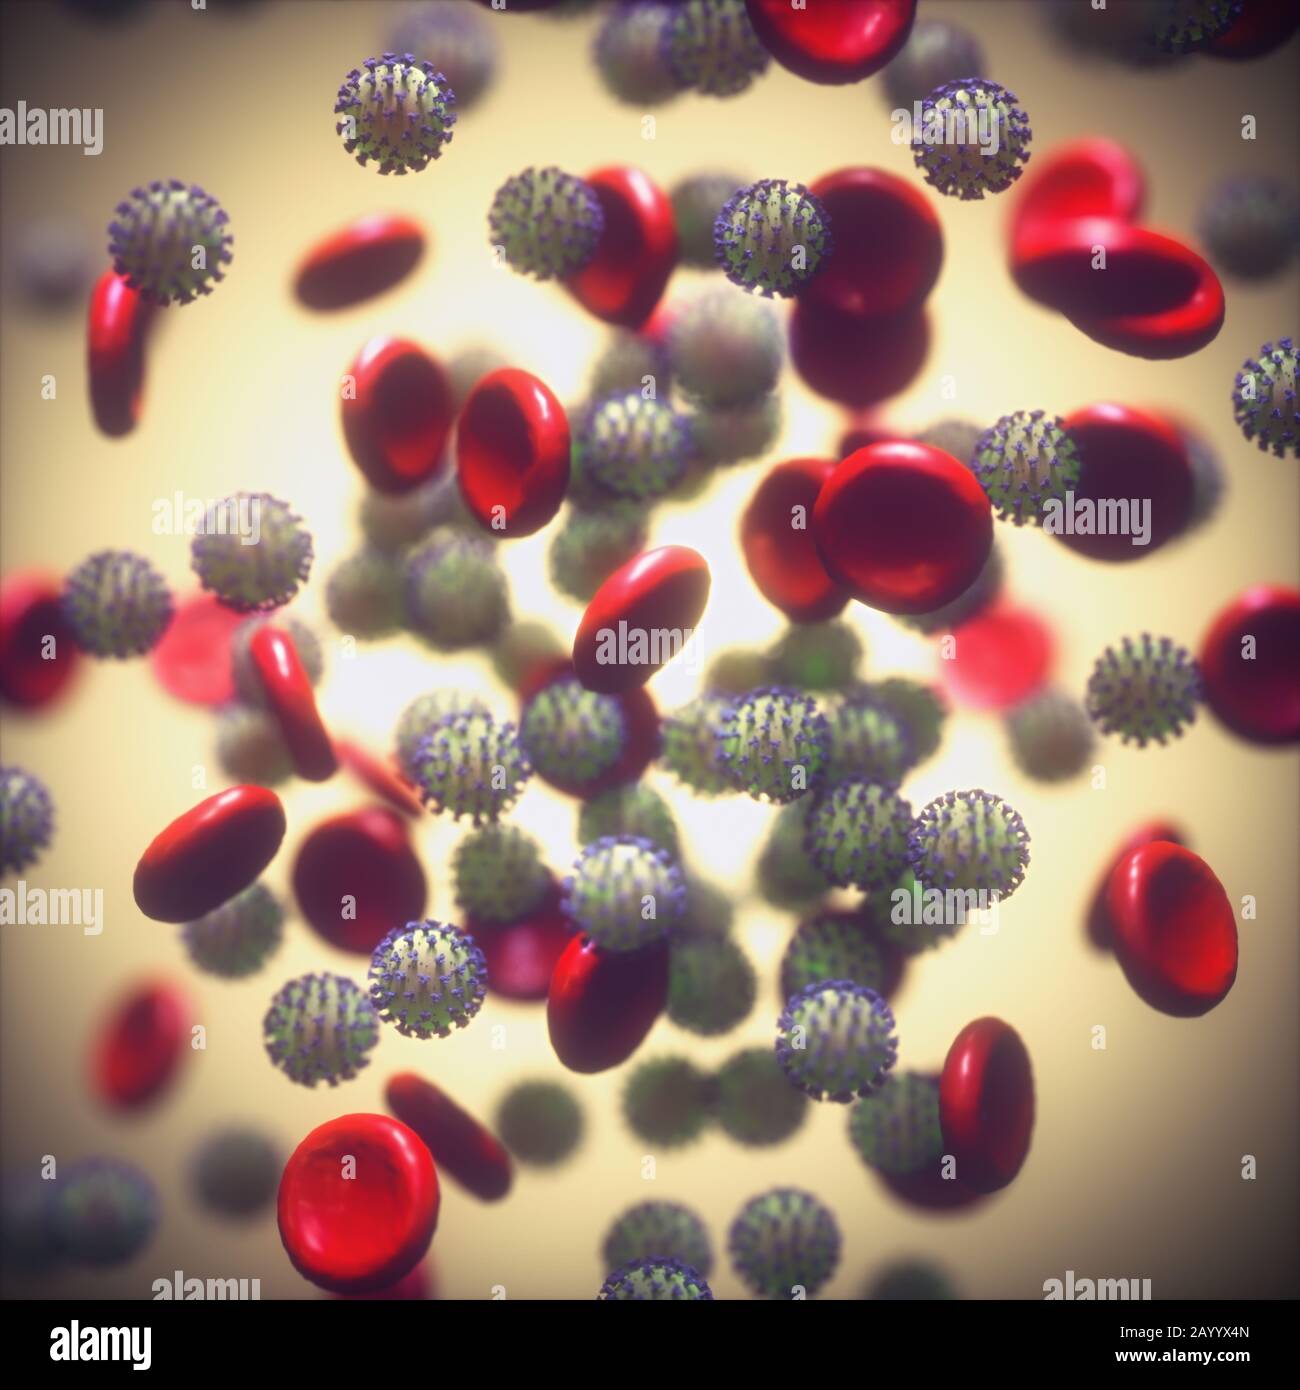 Virus COVID-19, Coronavirus, group of viruses attacking red blood cells. In humans, the virus causes respiratory infections. 3D illustration. Stock Photo